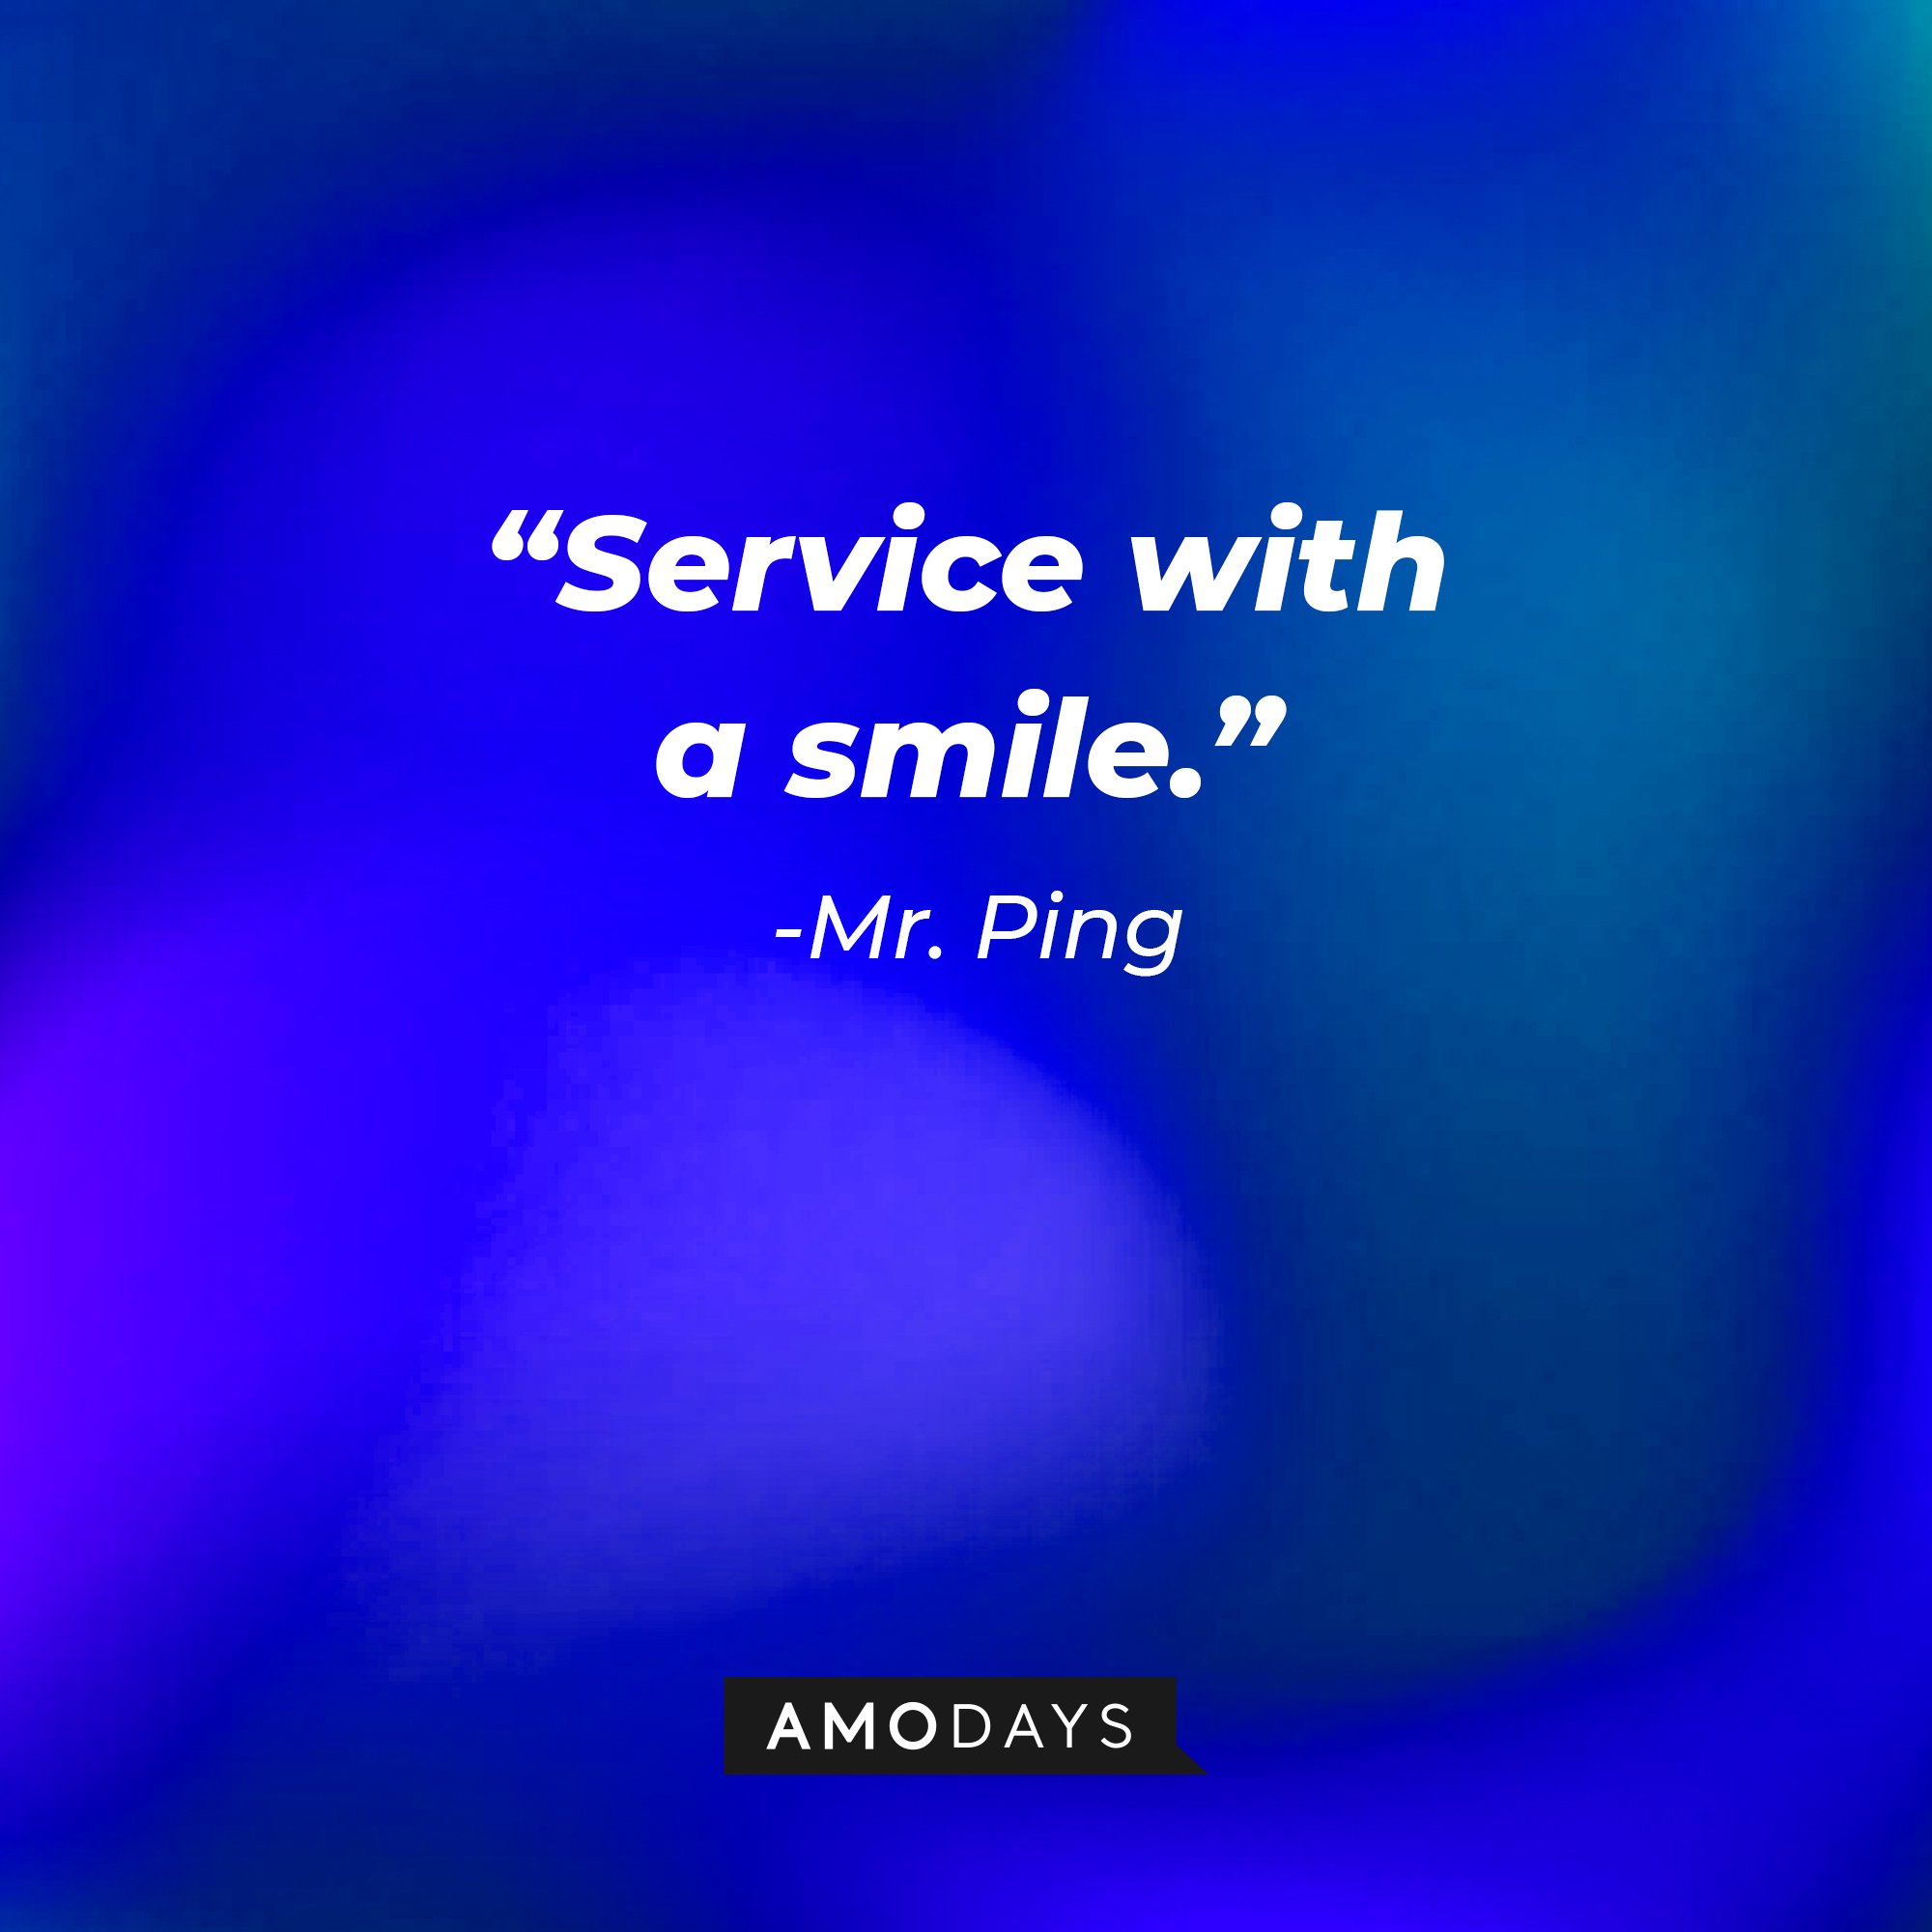 Mr. Ping's quote: “Service with a smile.” | Image: Amodays